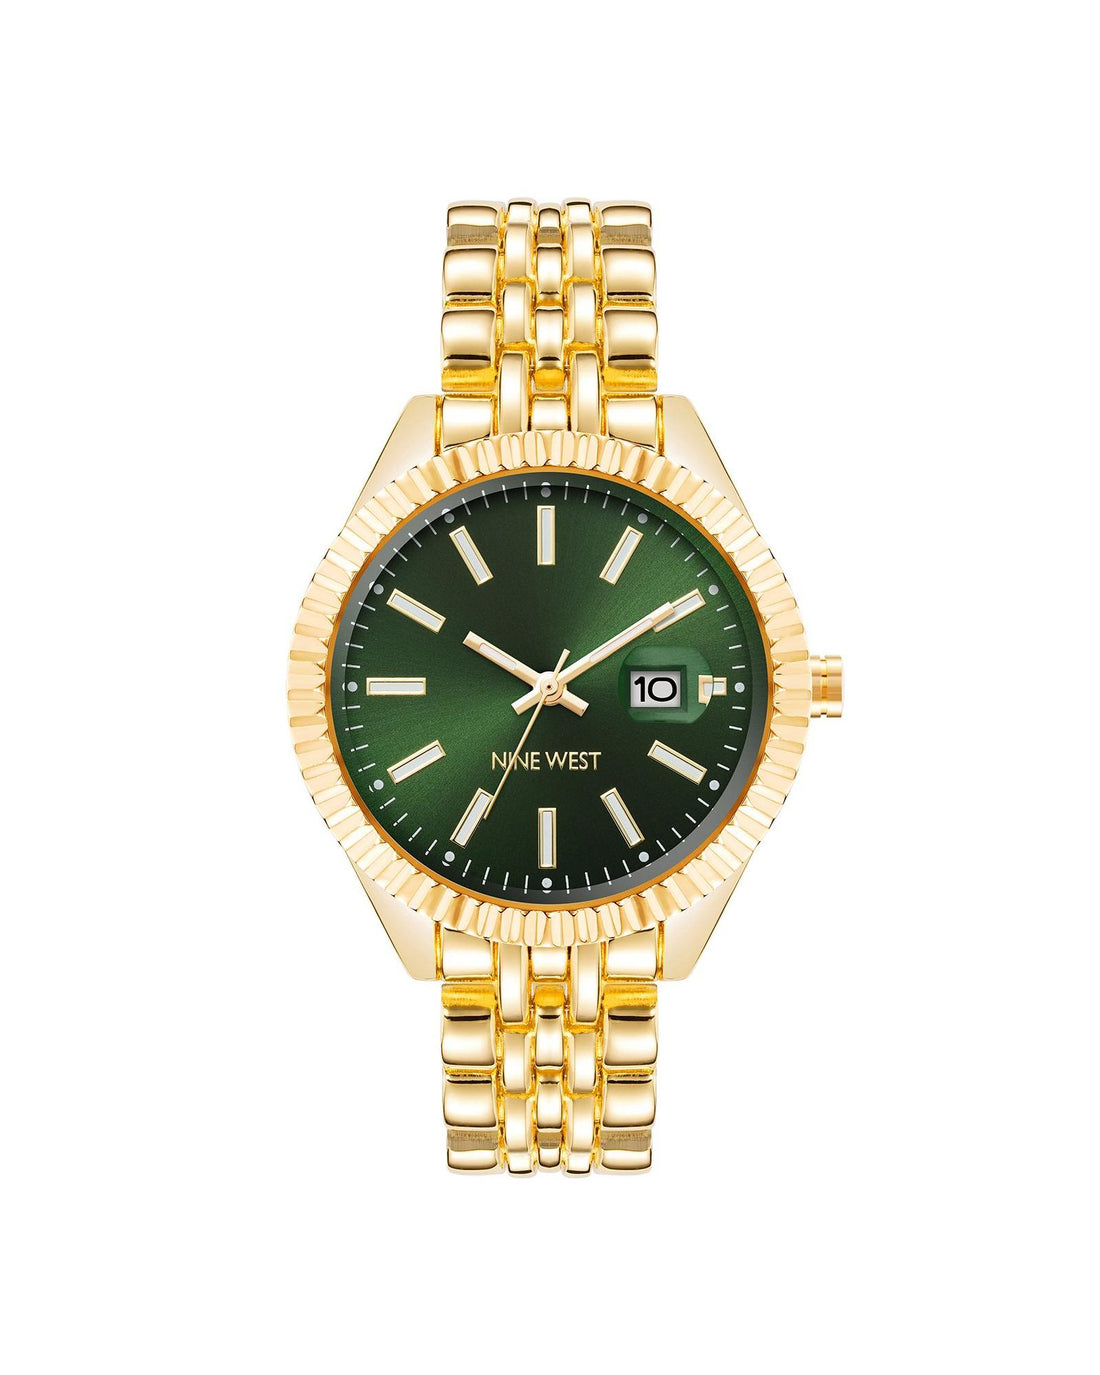 Gold Fashion Analog Womens Watch with Day and Date Functions One Size Women-Women&